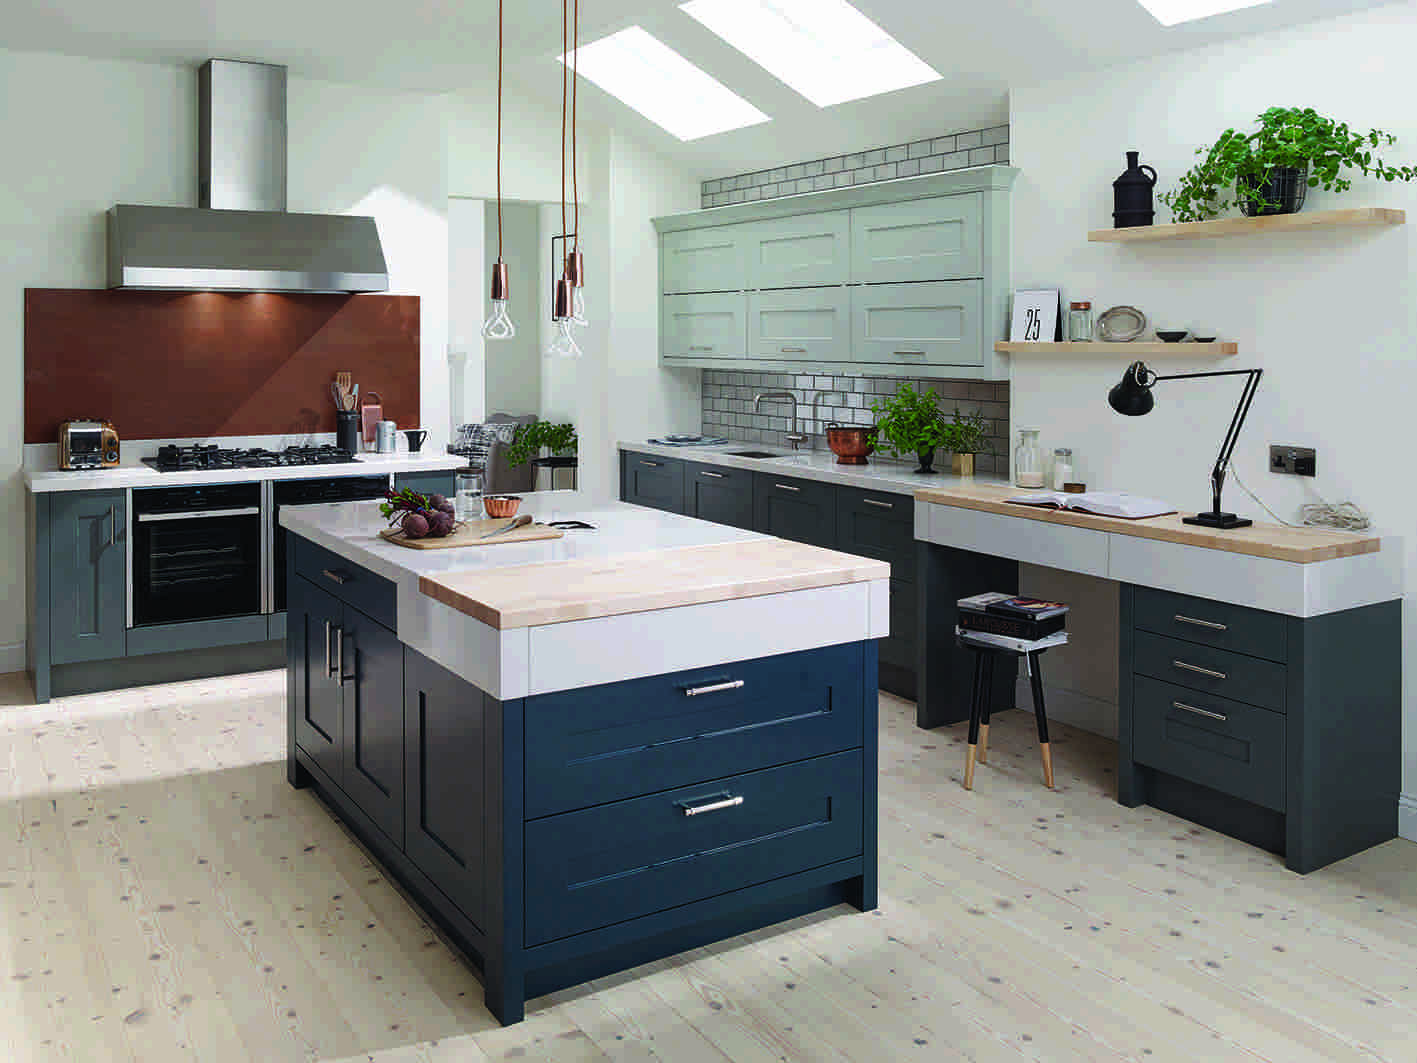 Bespoke Contemporary Blue Wooden kitchen with island by Haroys Interiors Dorset